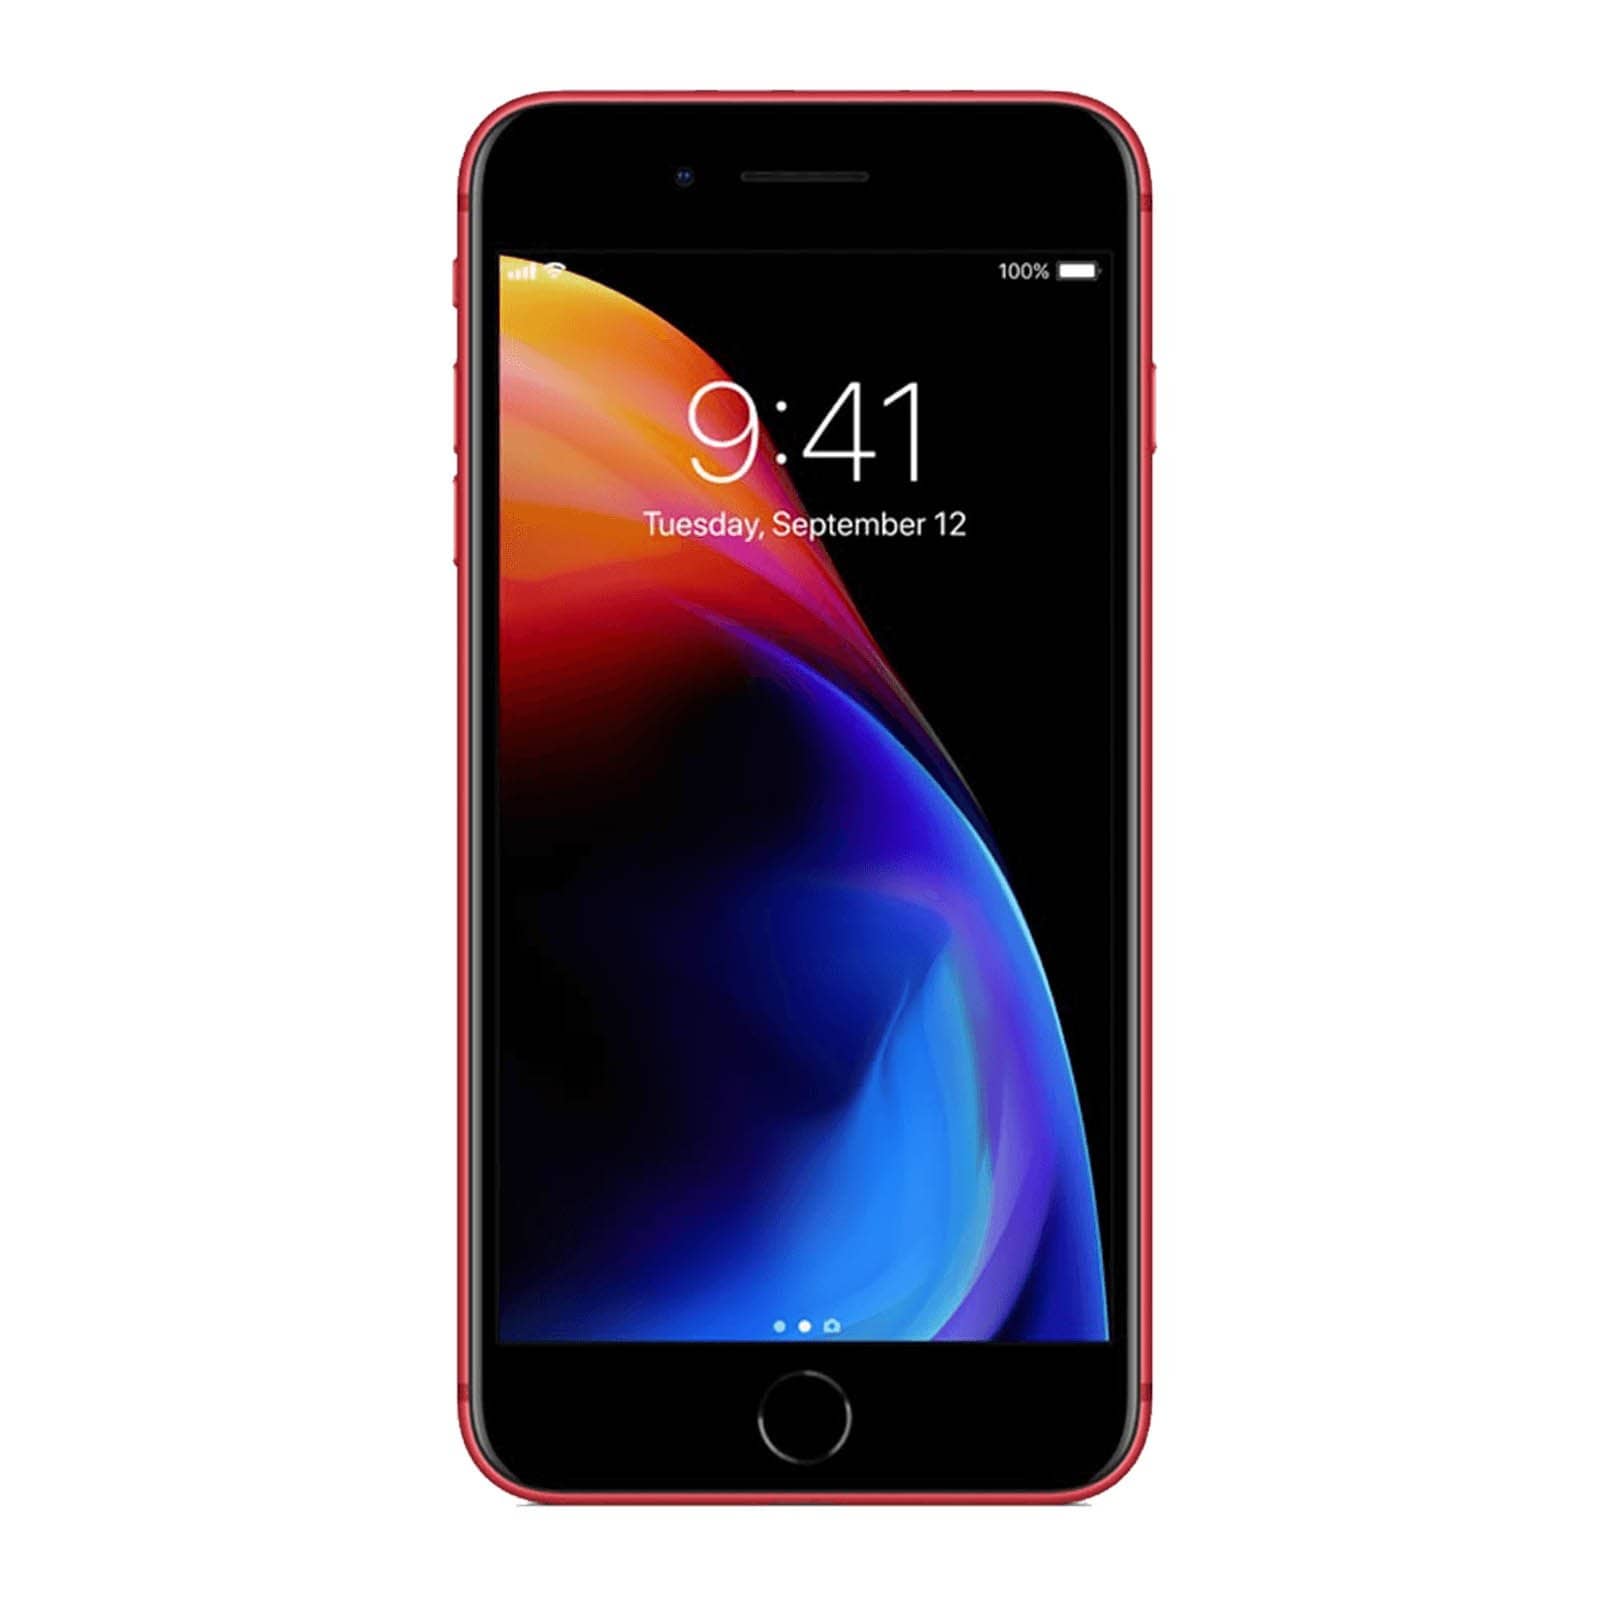 Apple iPhone 8 64GB Product Red Good - Unlocked